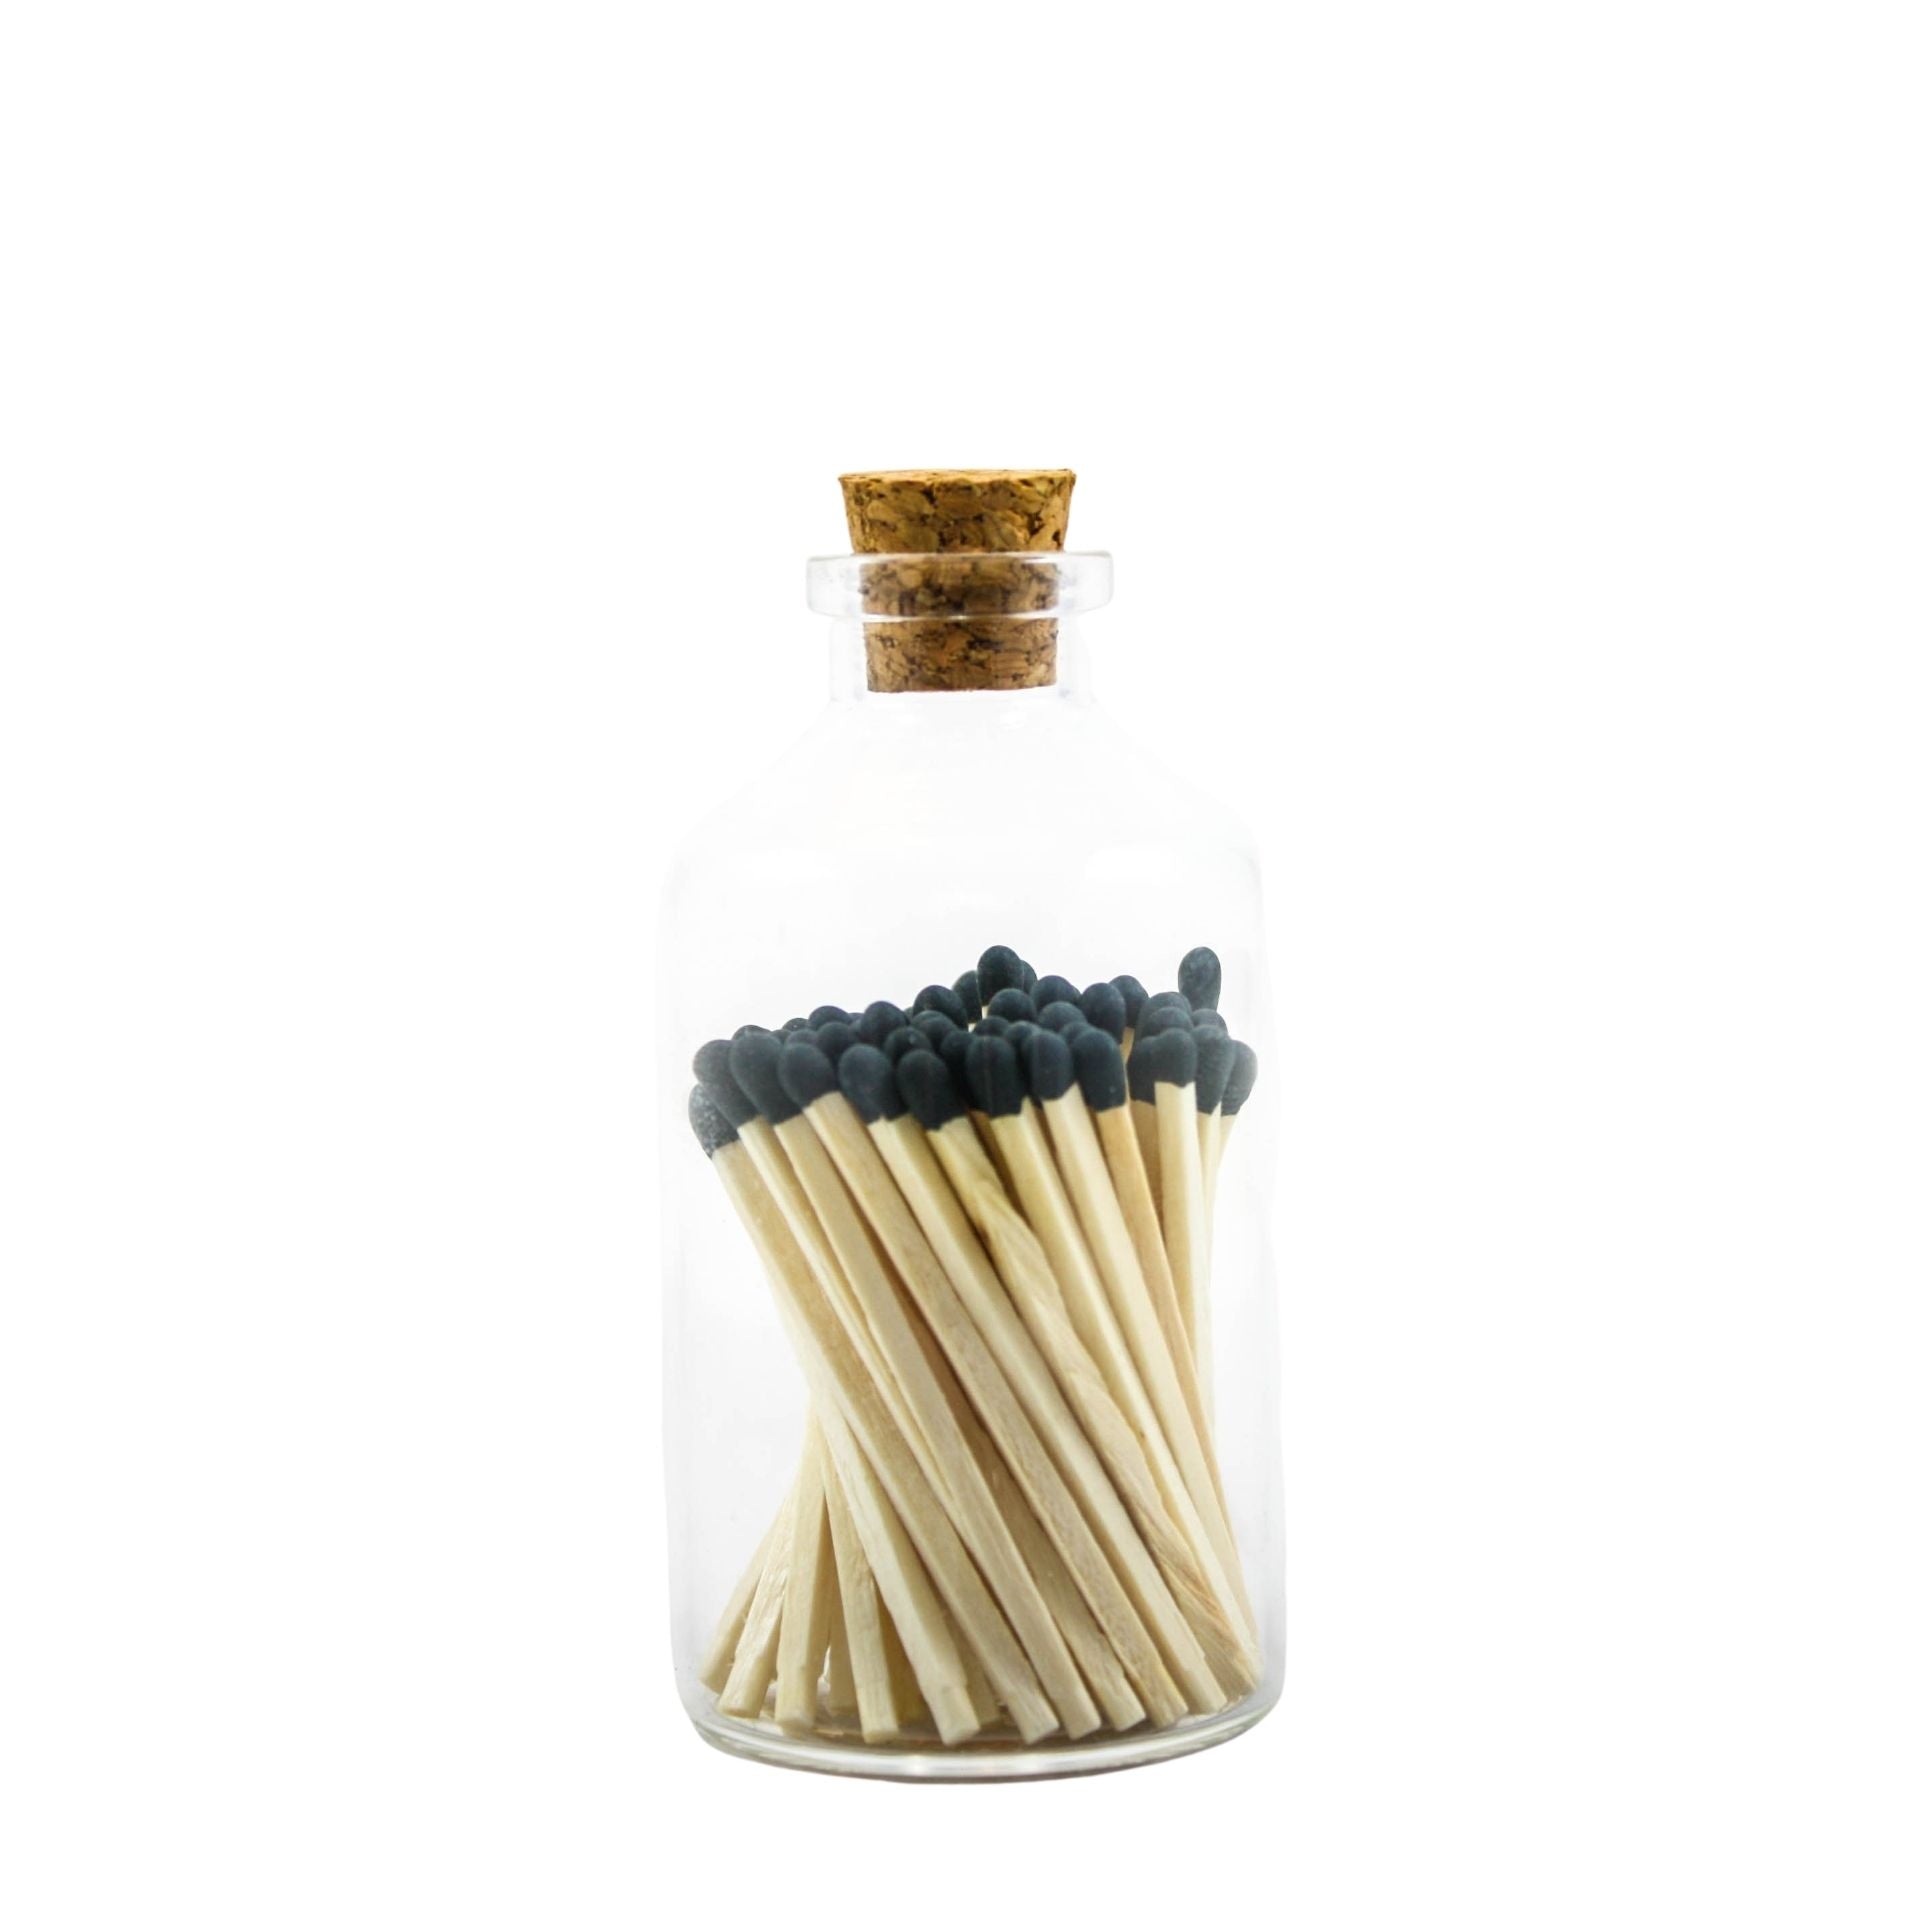 Black Tipped Matches in Jar